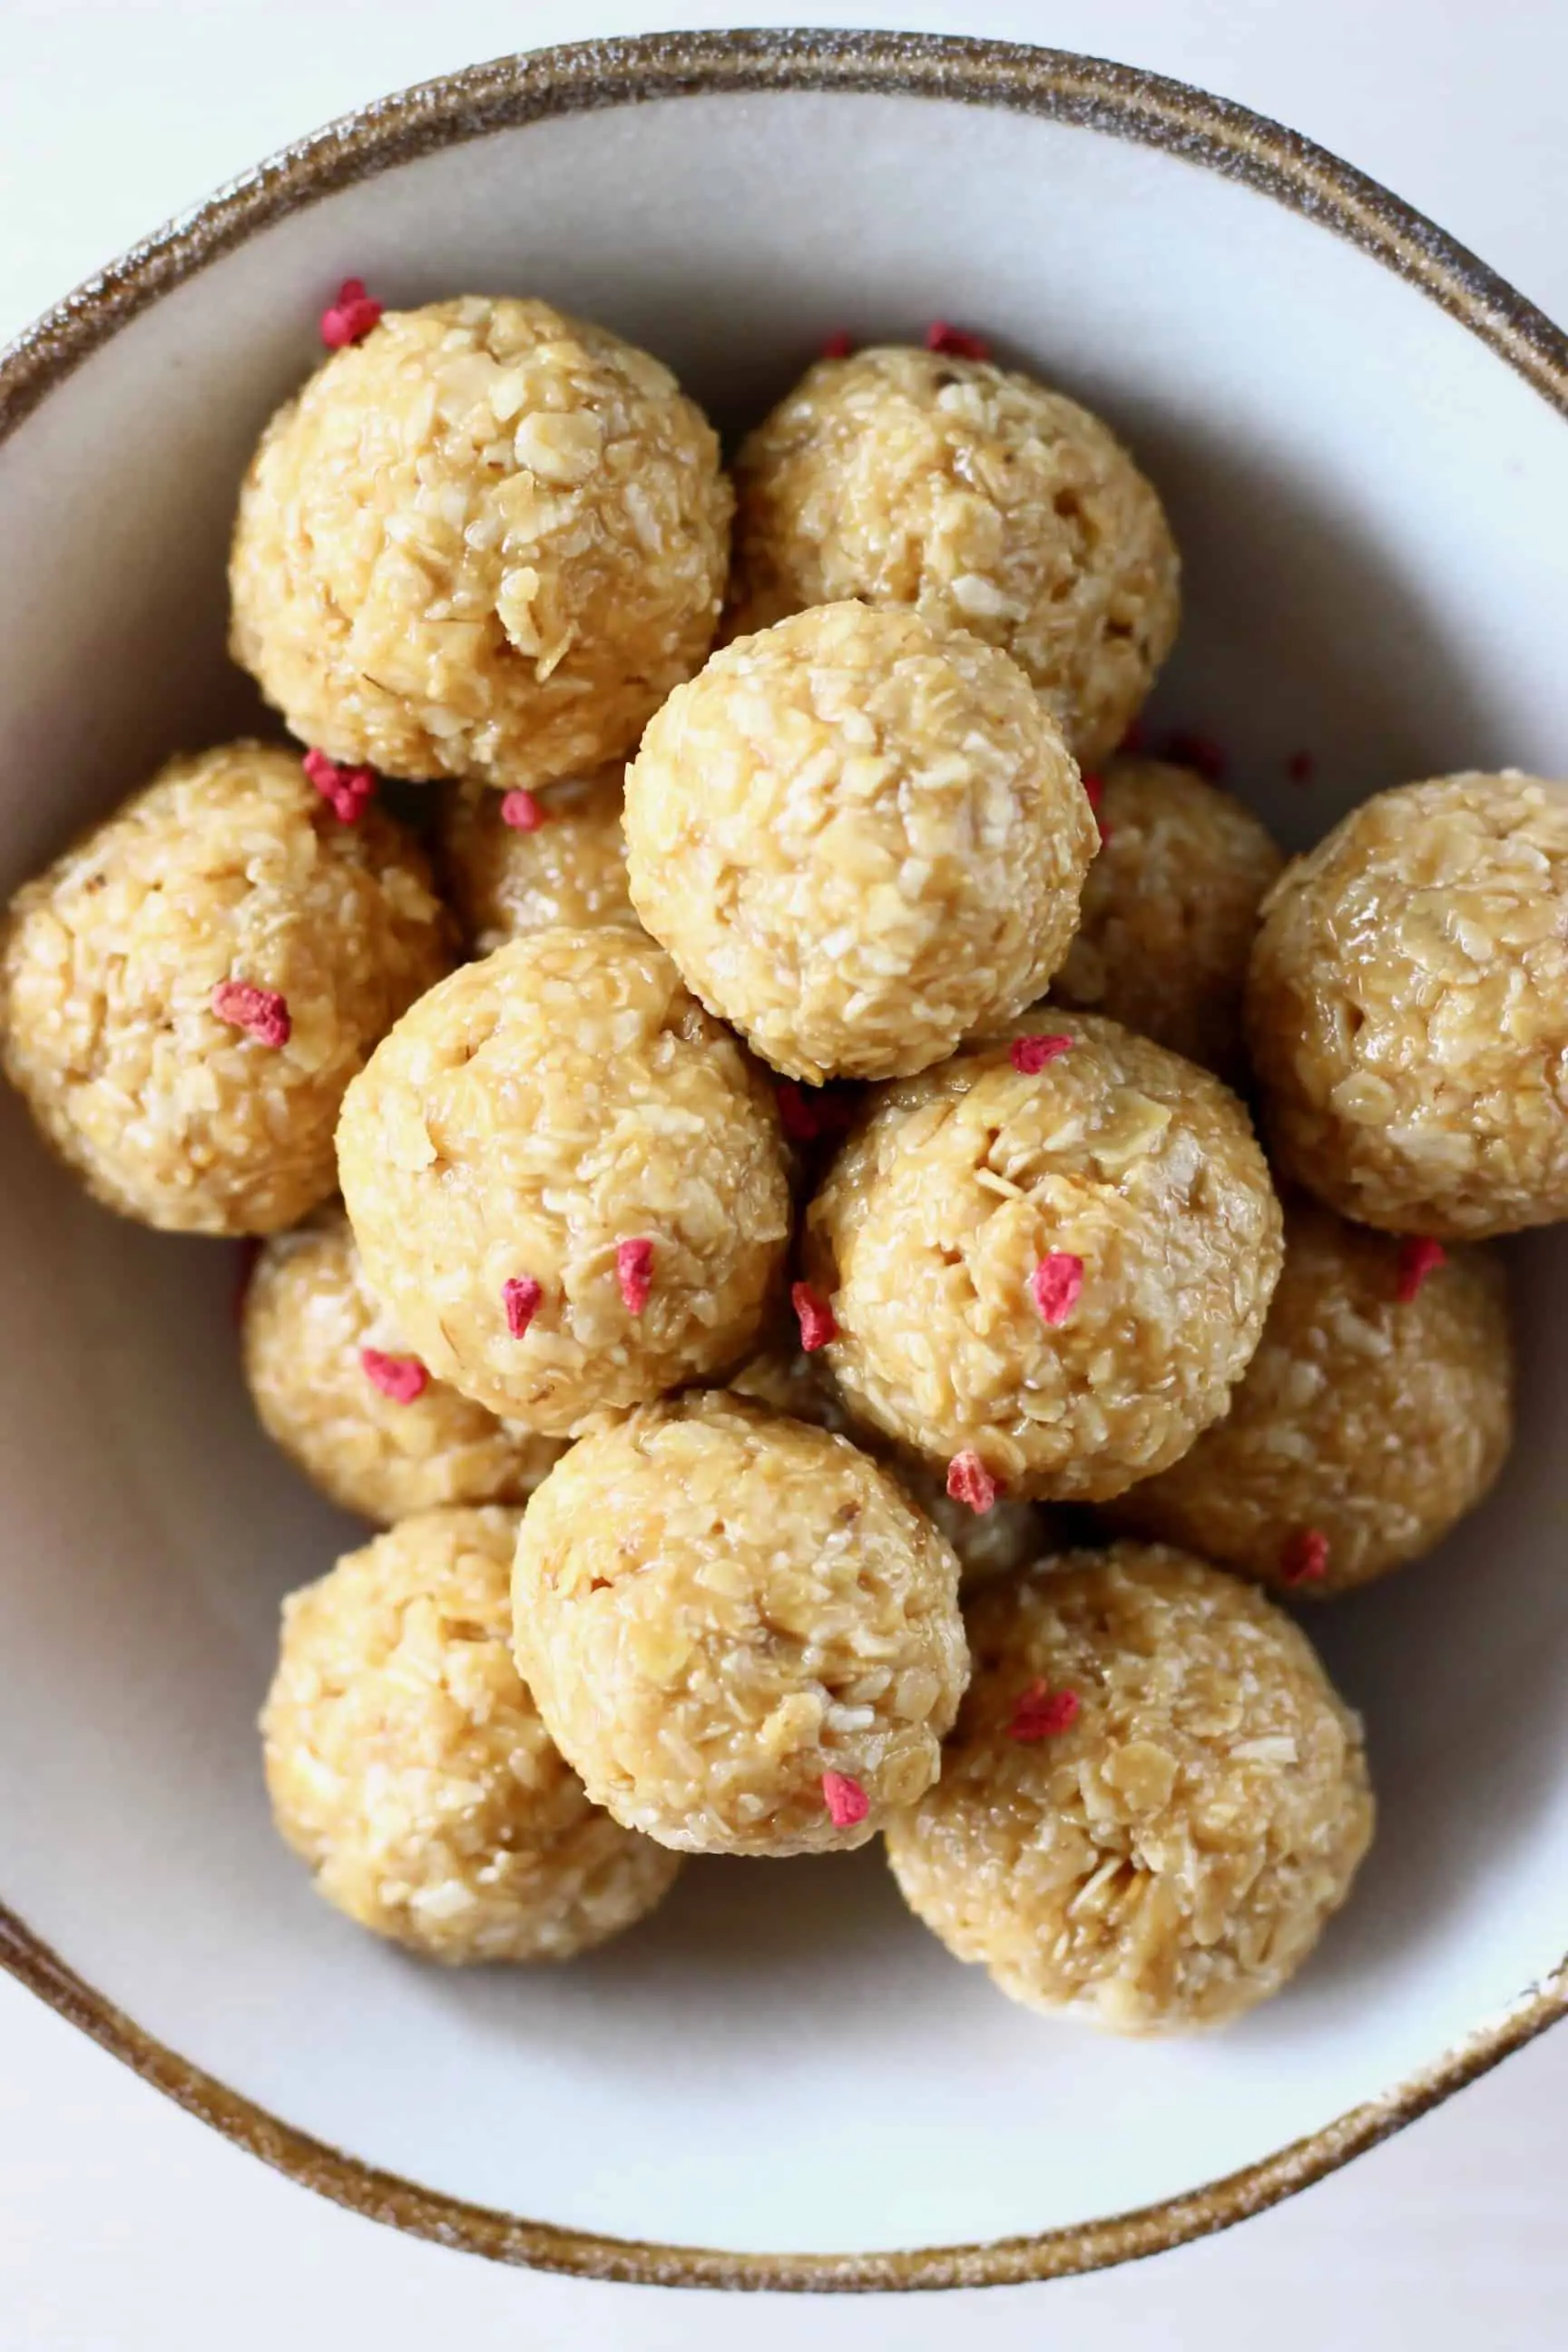 A pile of no-bake energy bites in a bowl